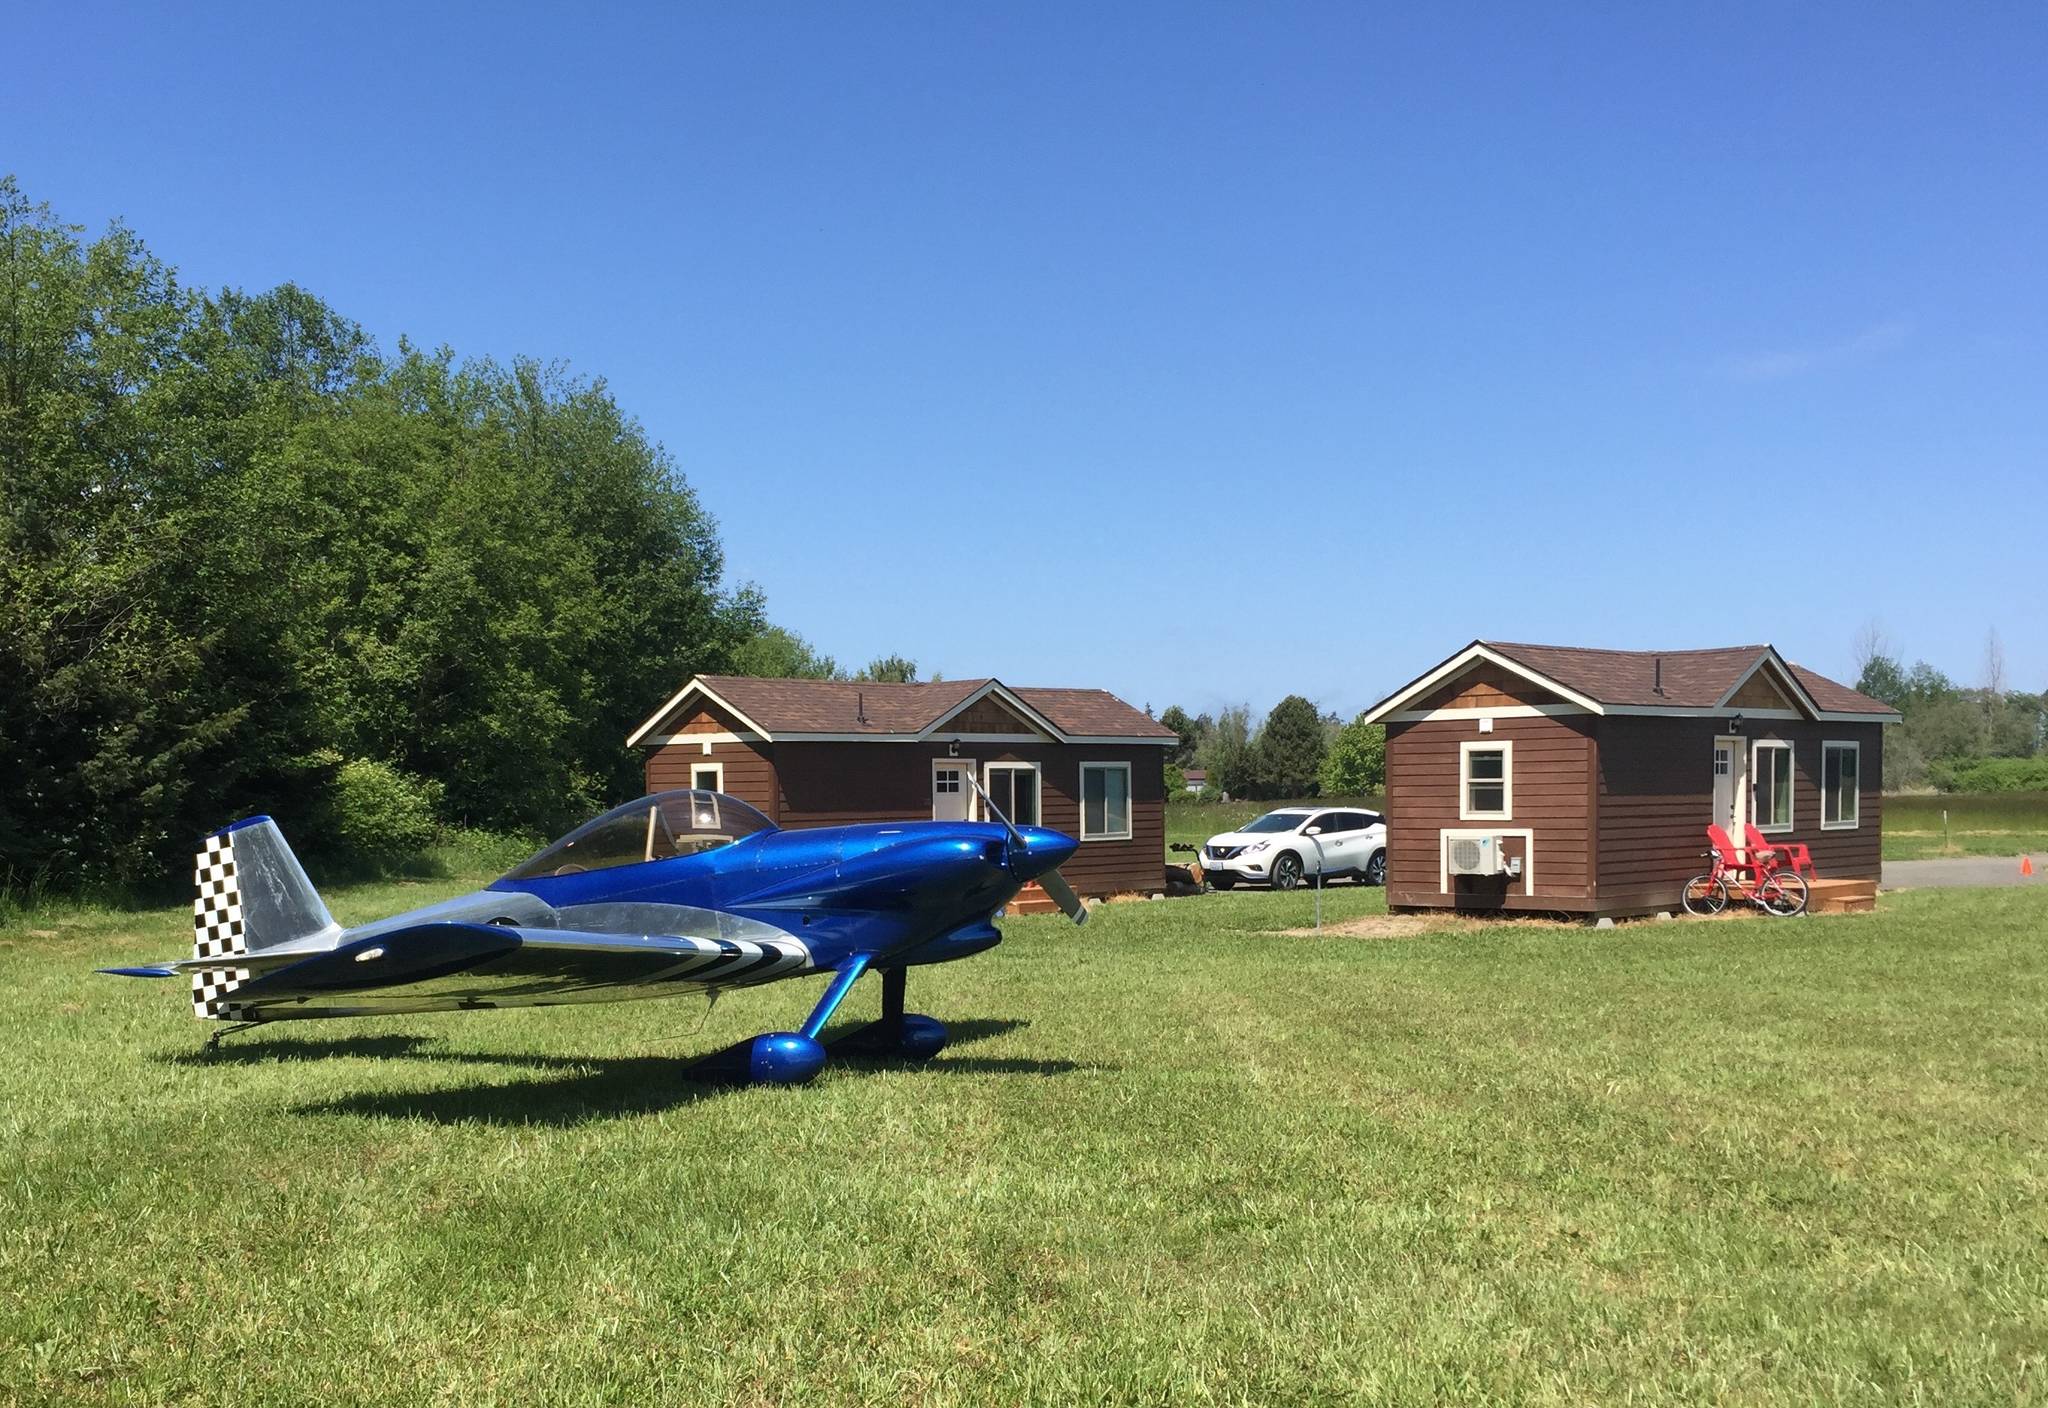 Sequim Valley Airport in 2018 added two tiny houses, available at AirBnB. Photo courtesy of Andy Sallee/Sequim Valley Airport